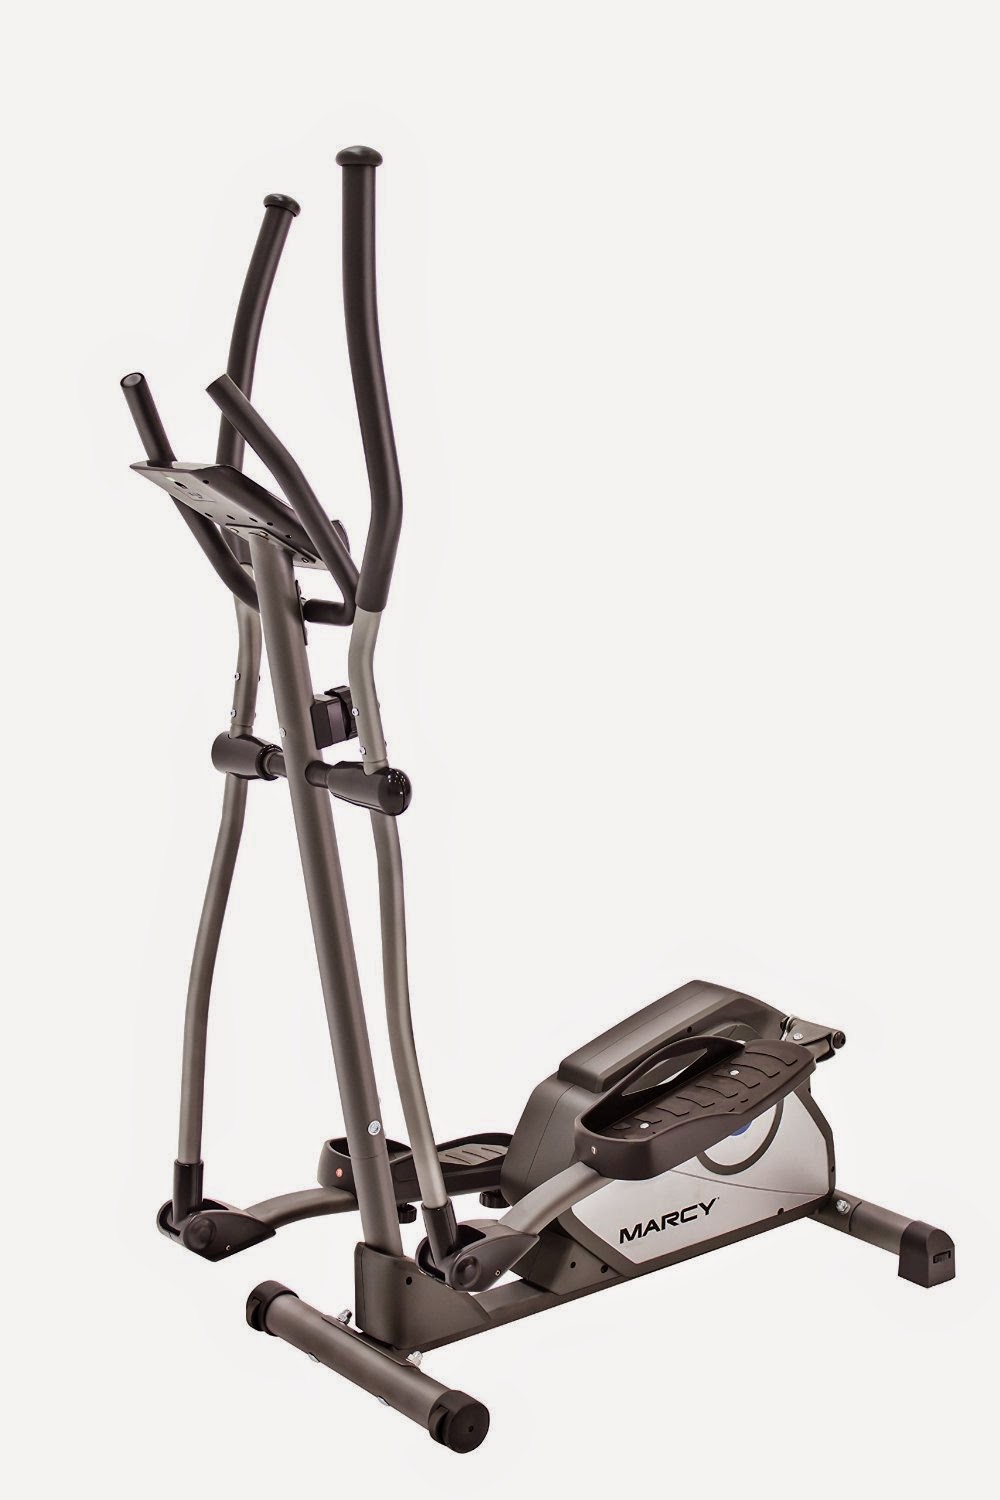 Marcy elliptical trainer ns11043e